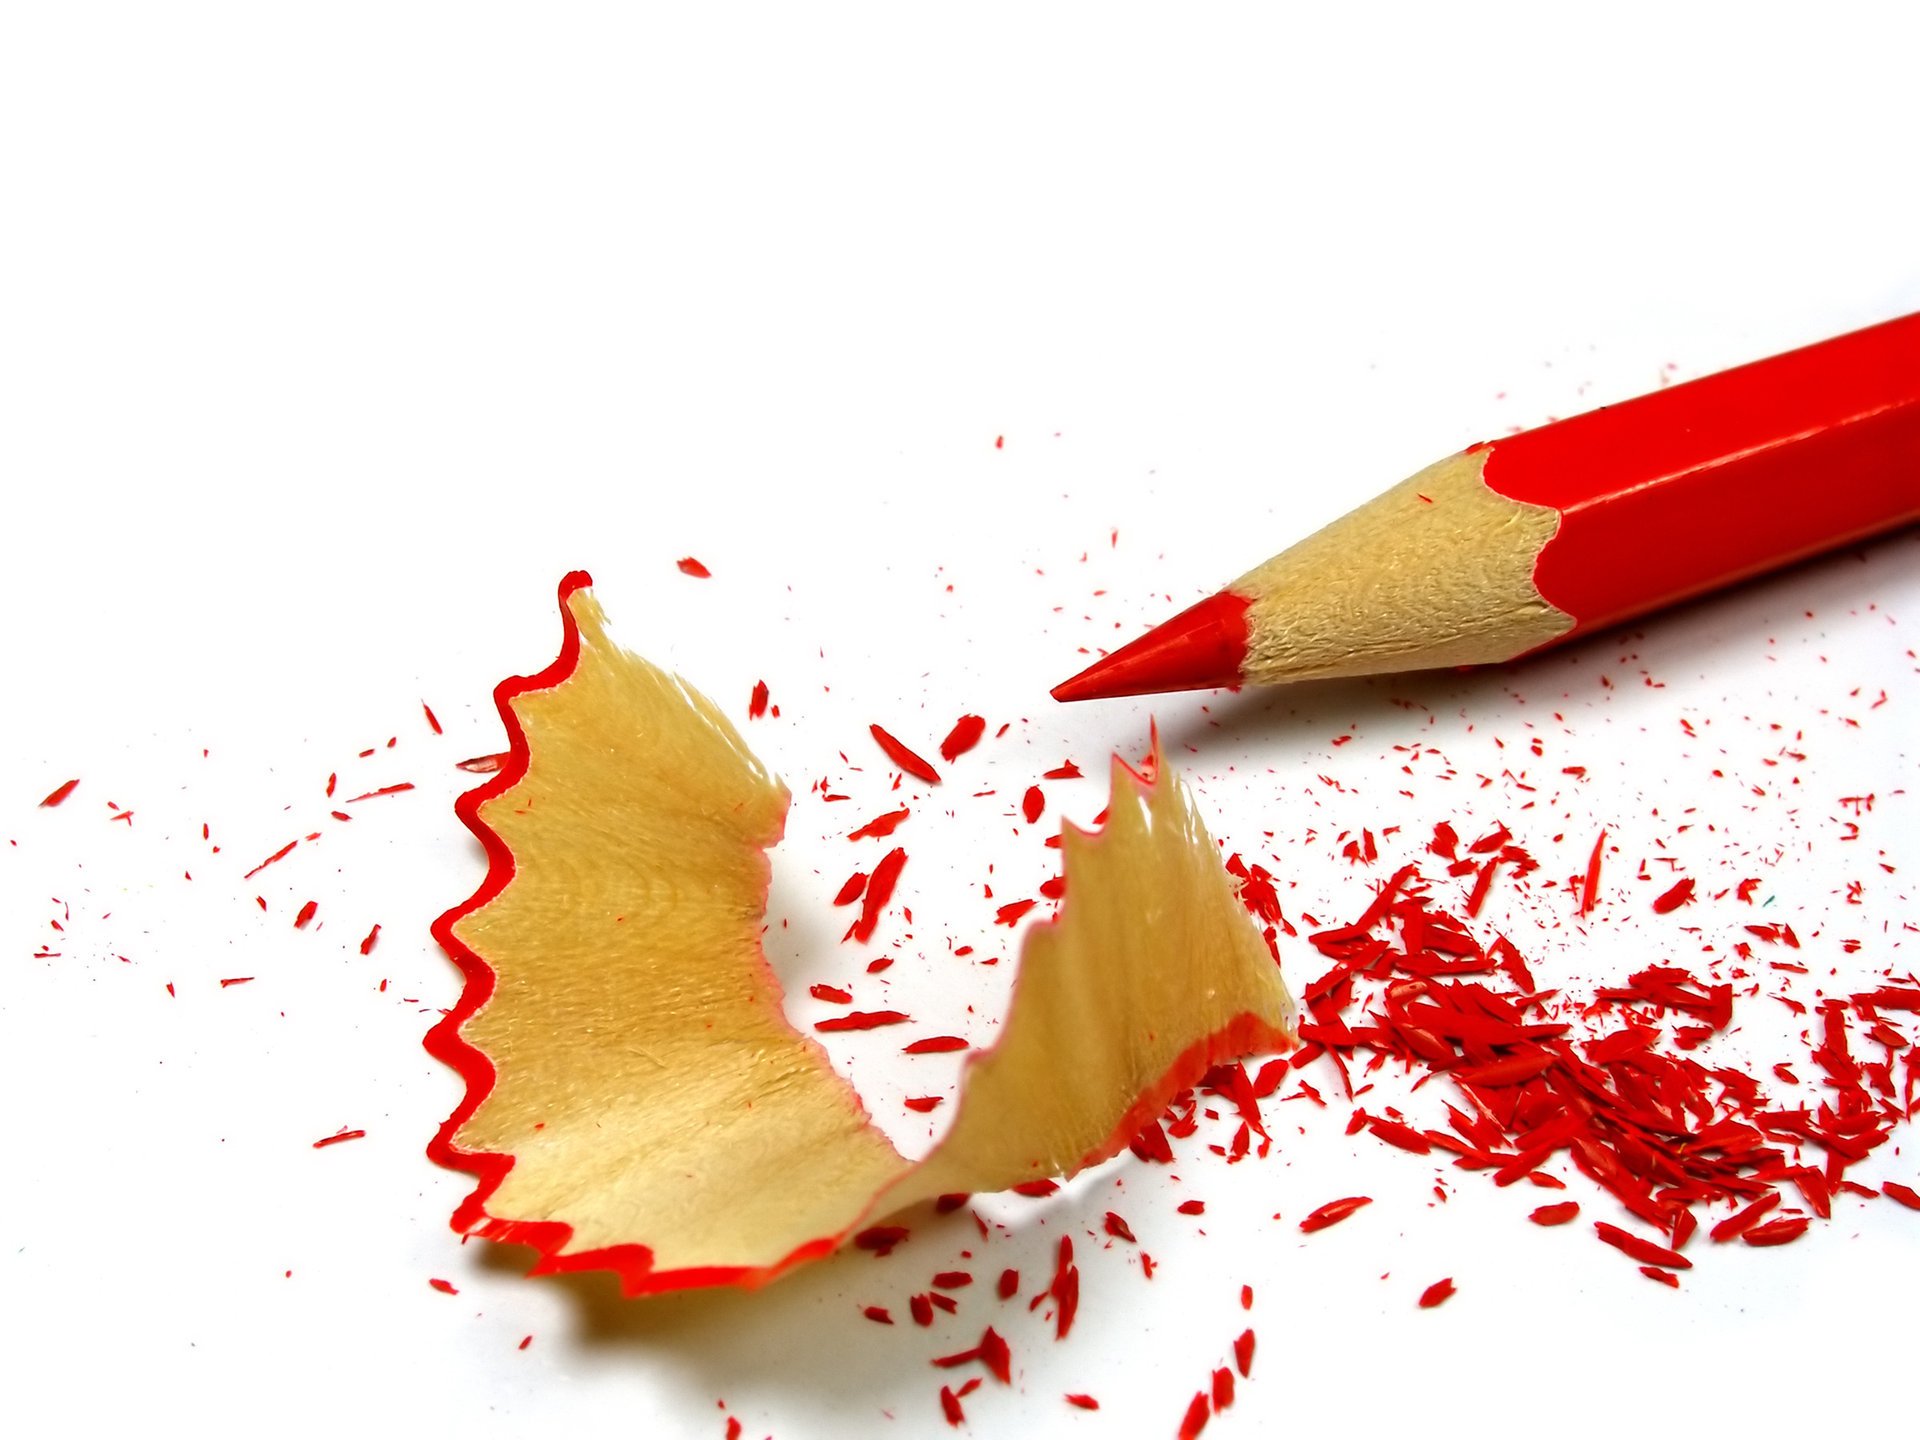 Large red pencil shavings